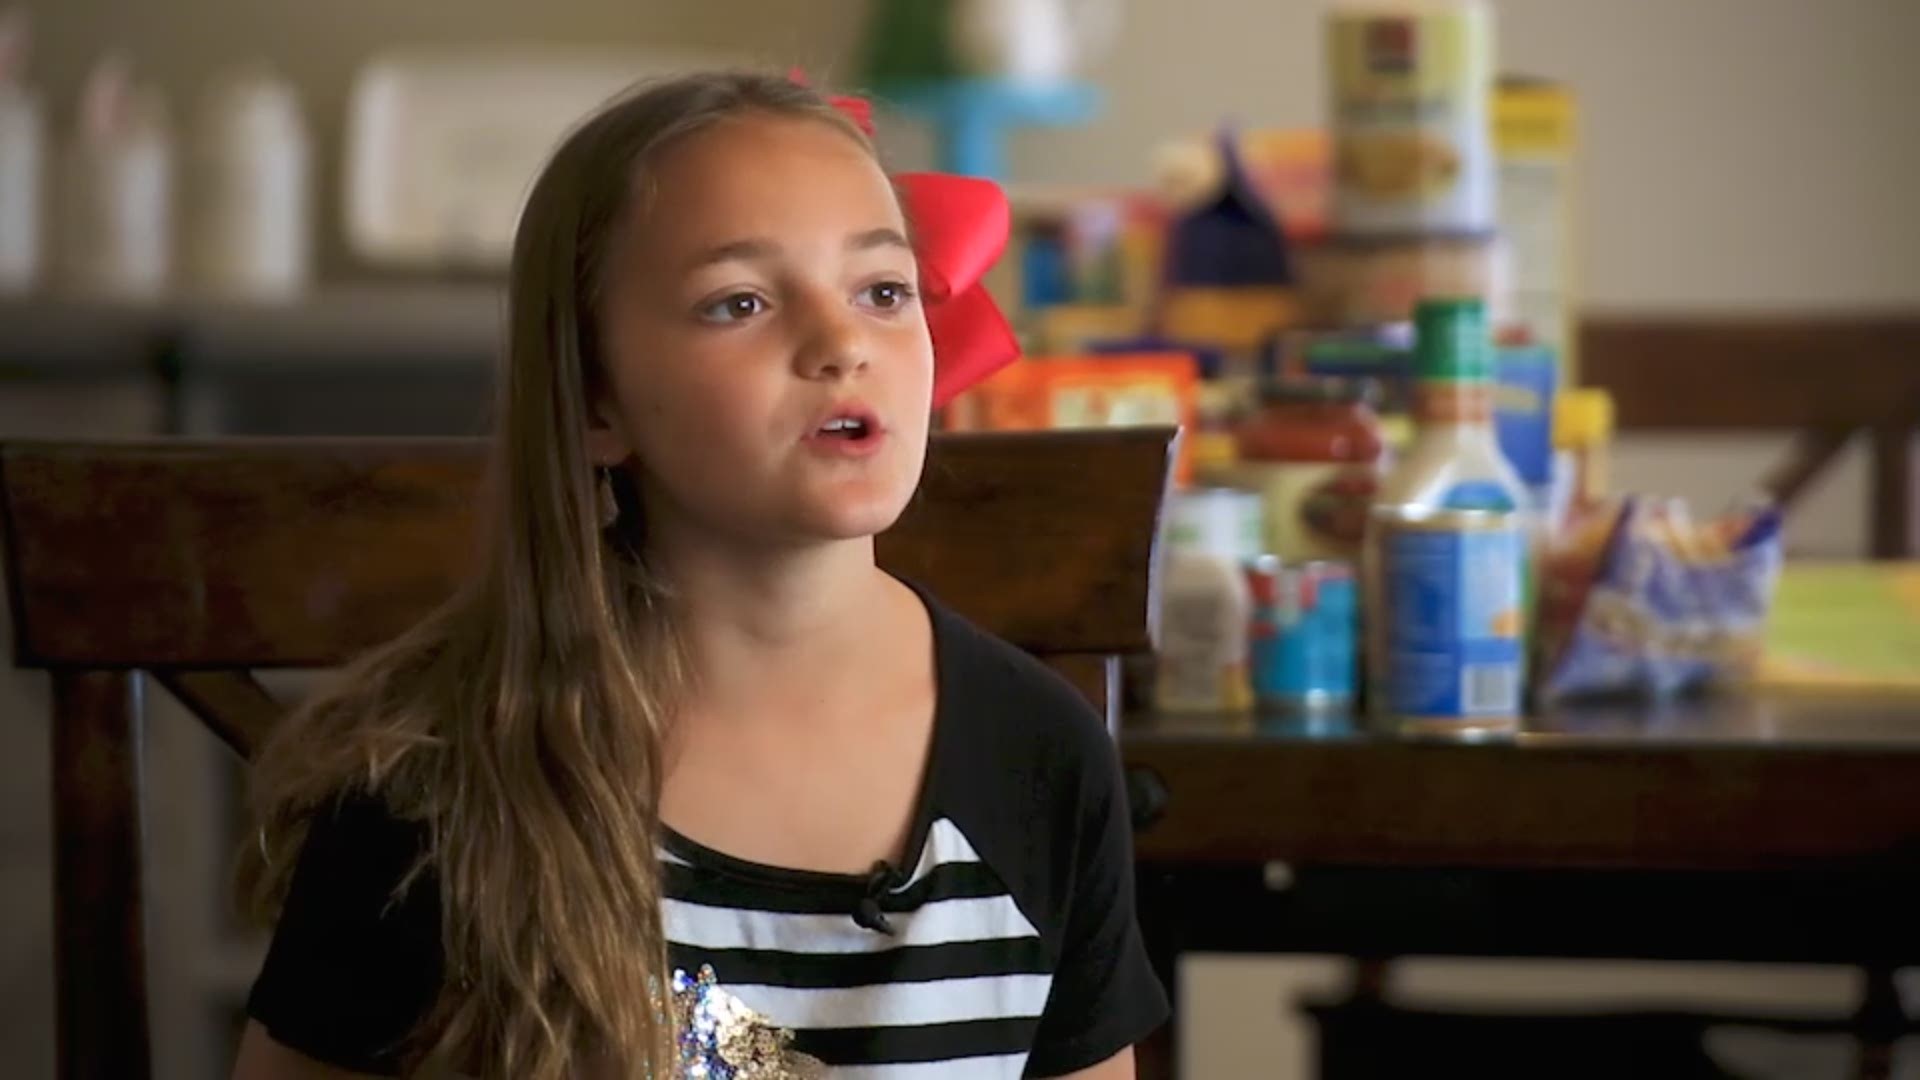 Gracie Garbade created Gracie's Canned Goods. Every fall, this 9-year-old collects food for the homeless in her community.